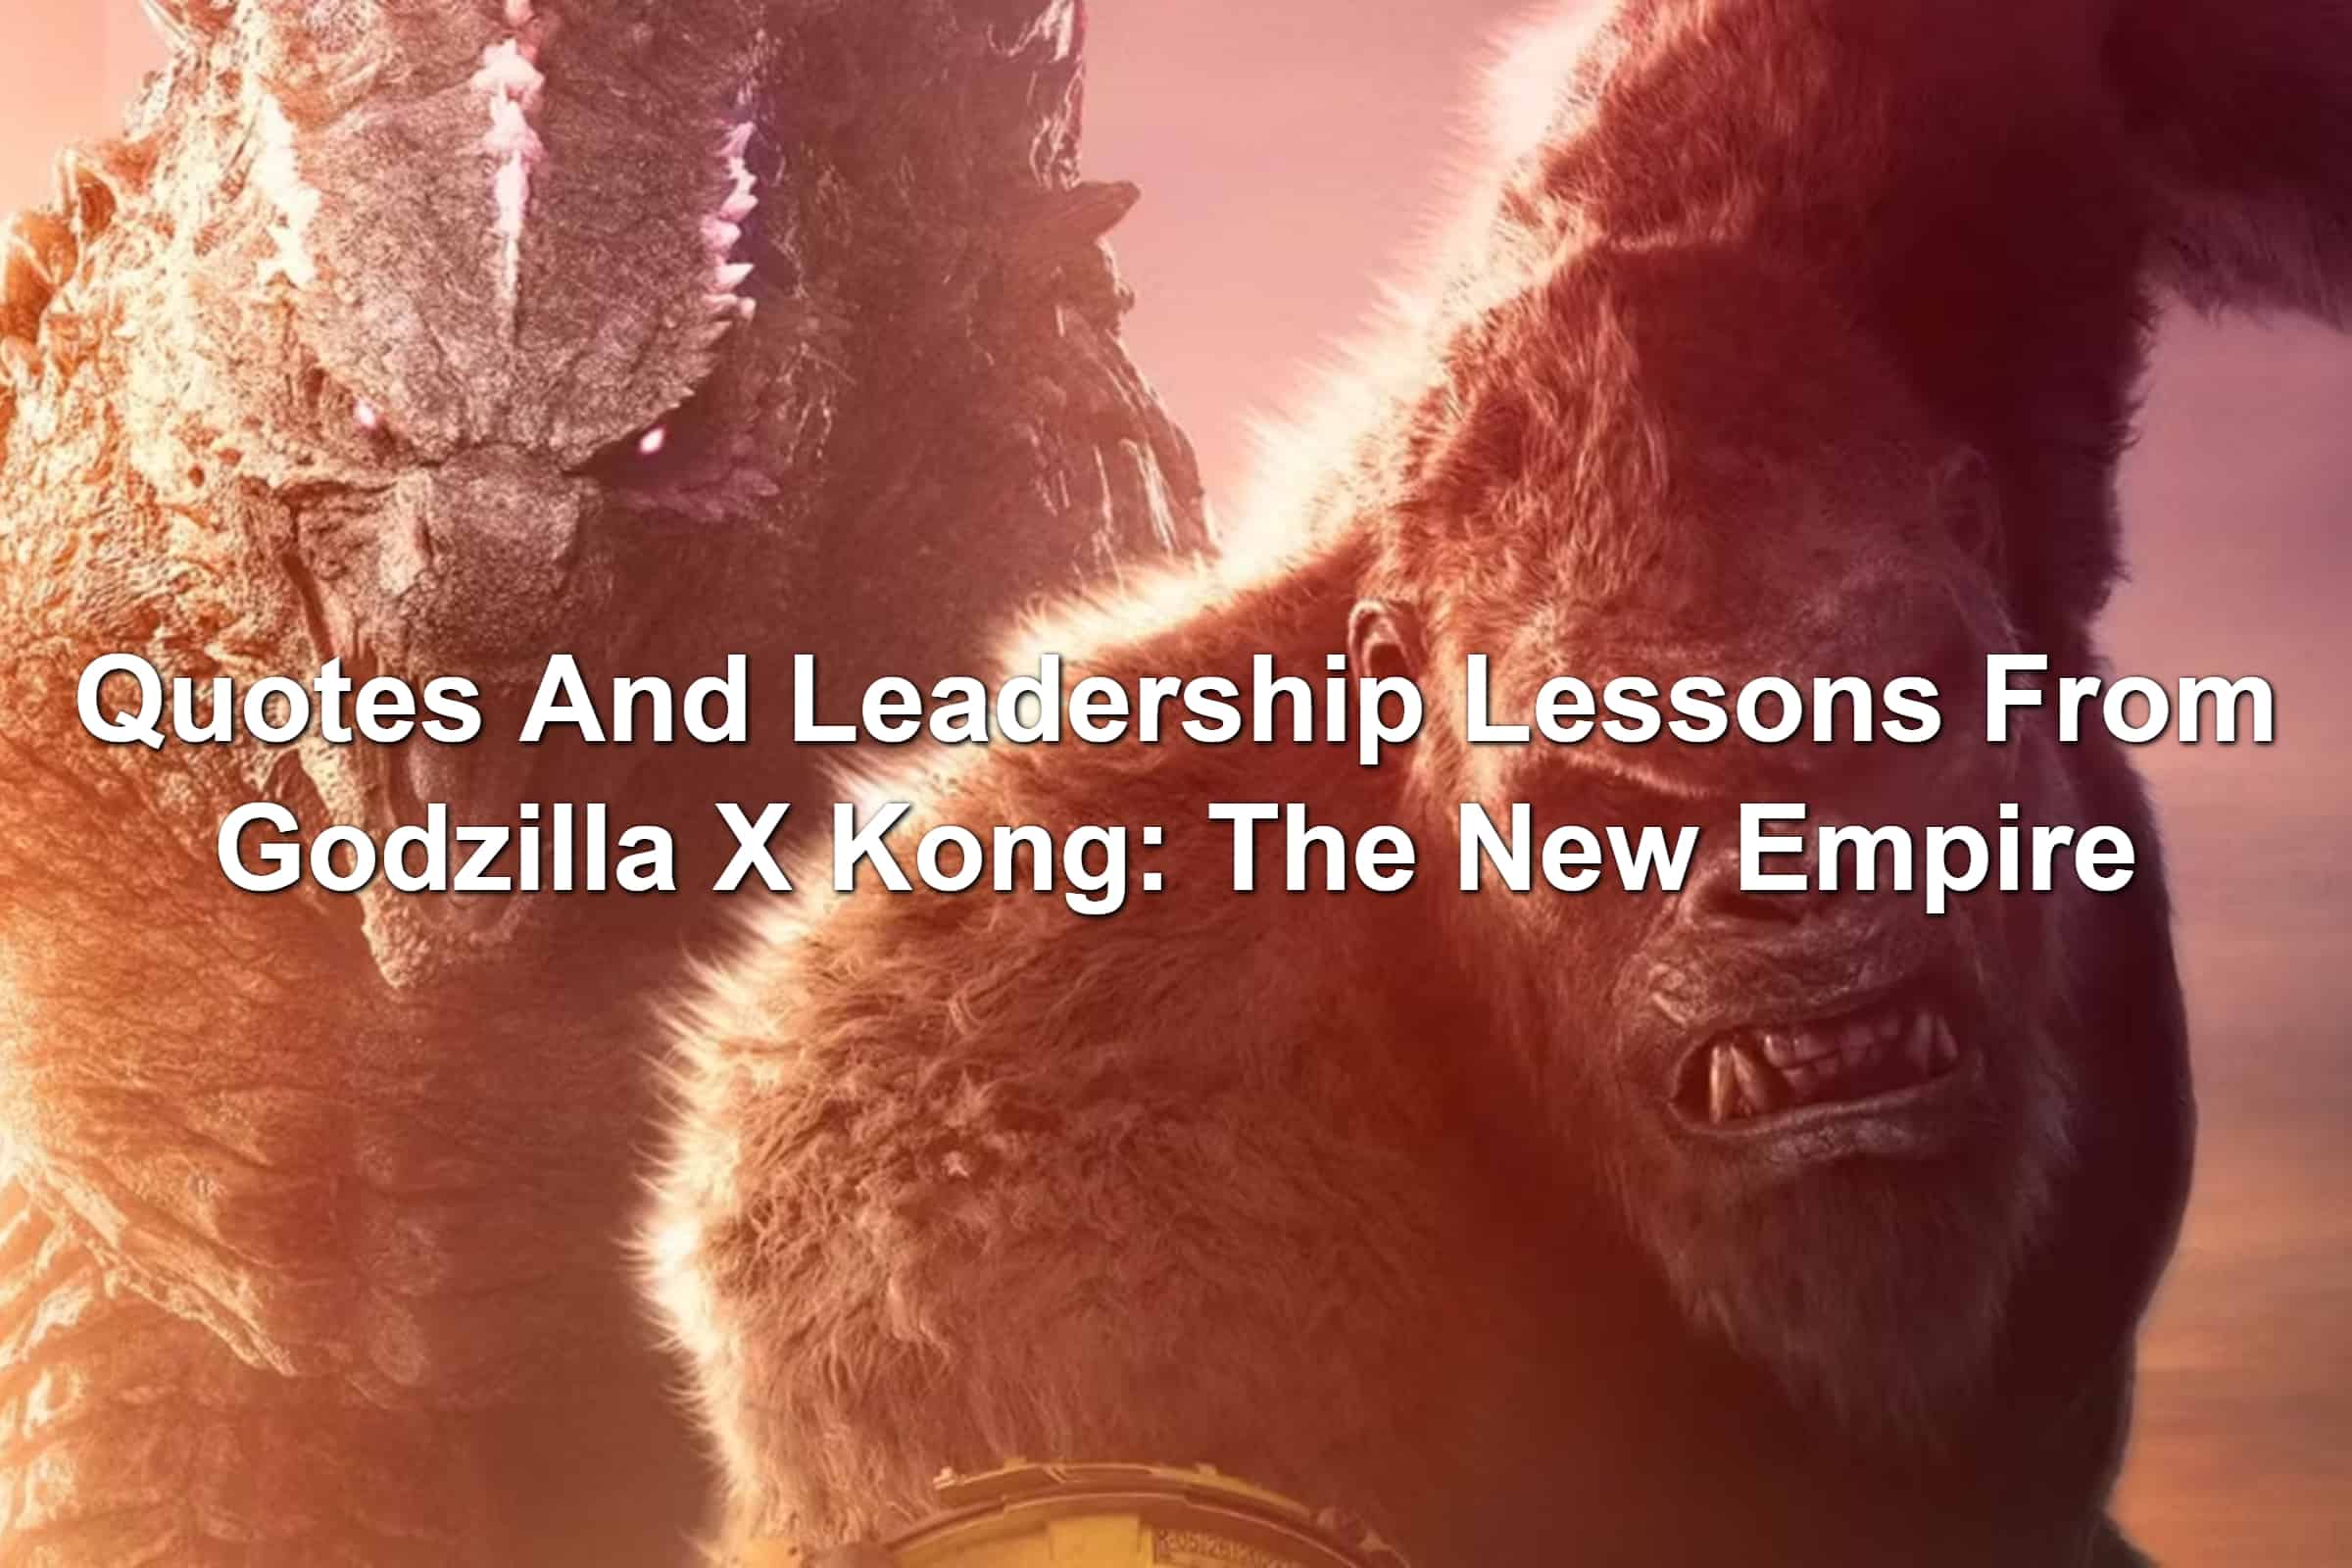 Godzilla and Kong (two gigantic creatures) charging forward with a pinkish background